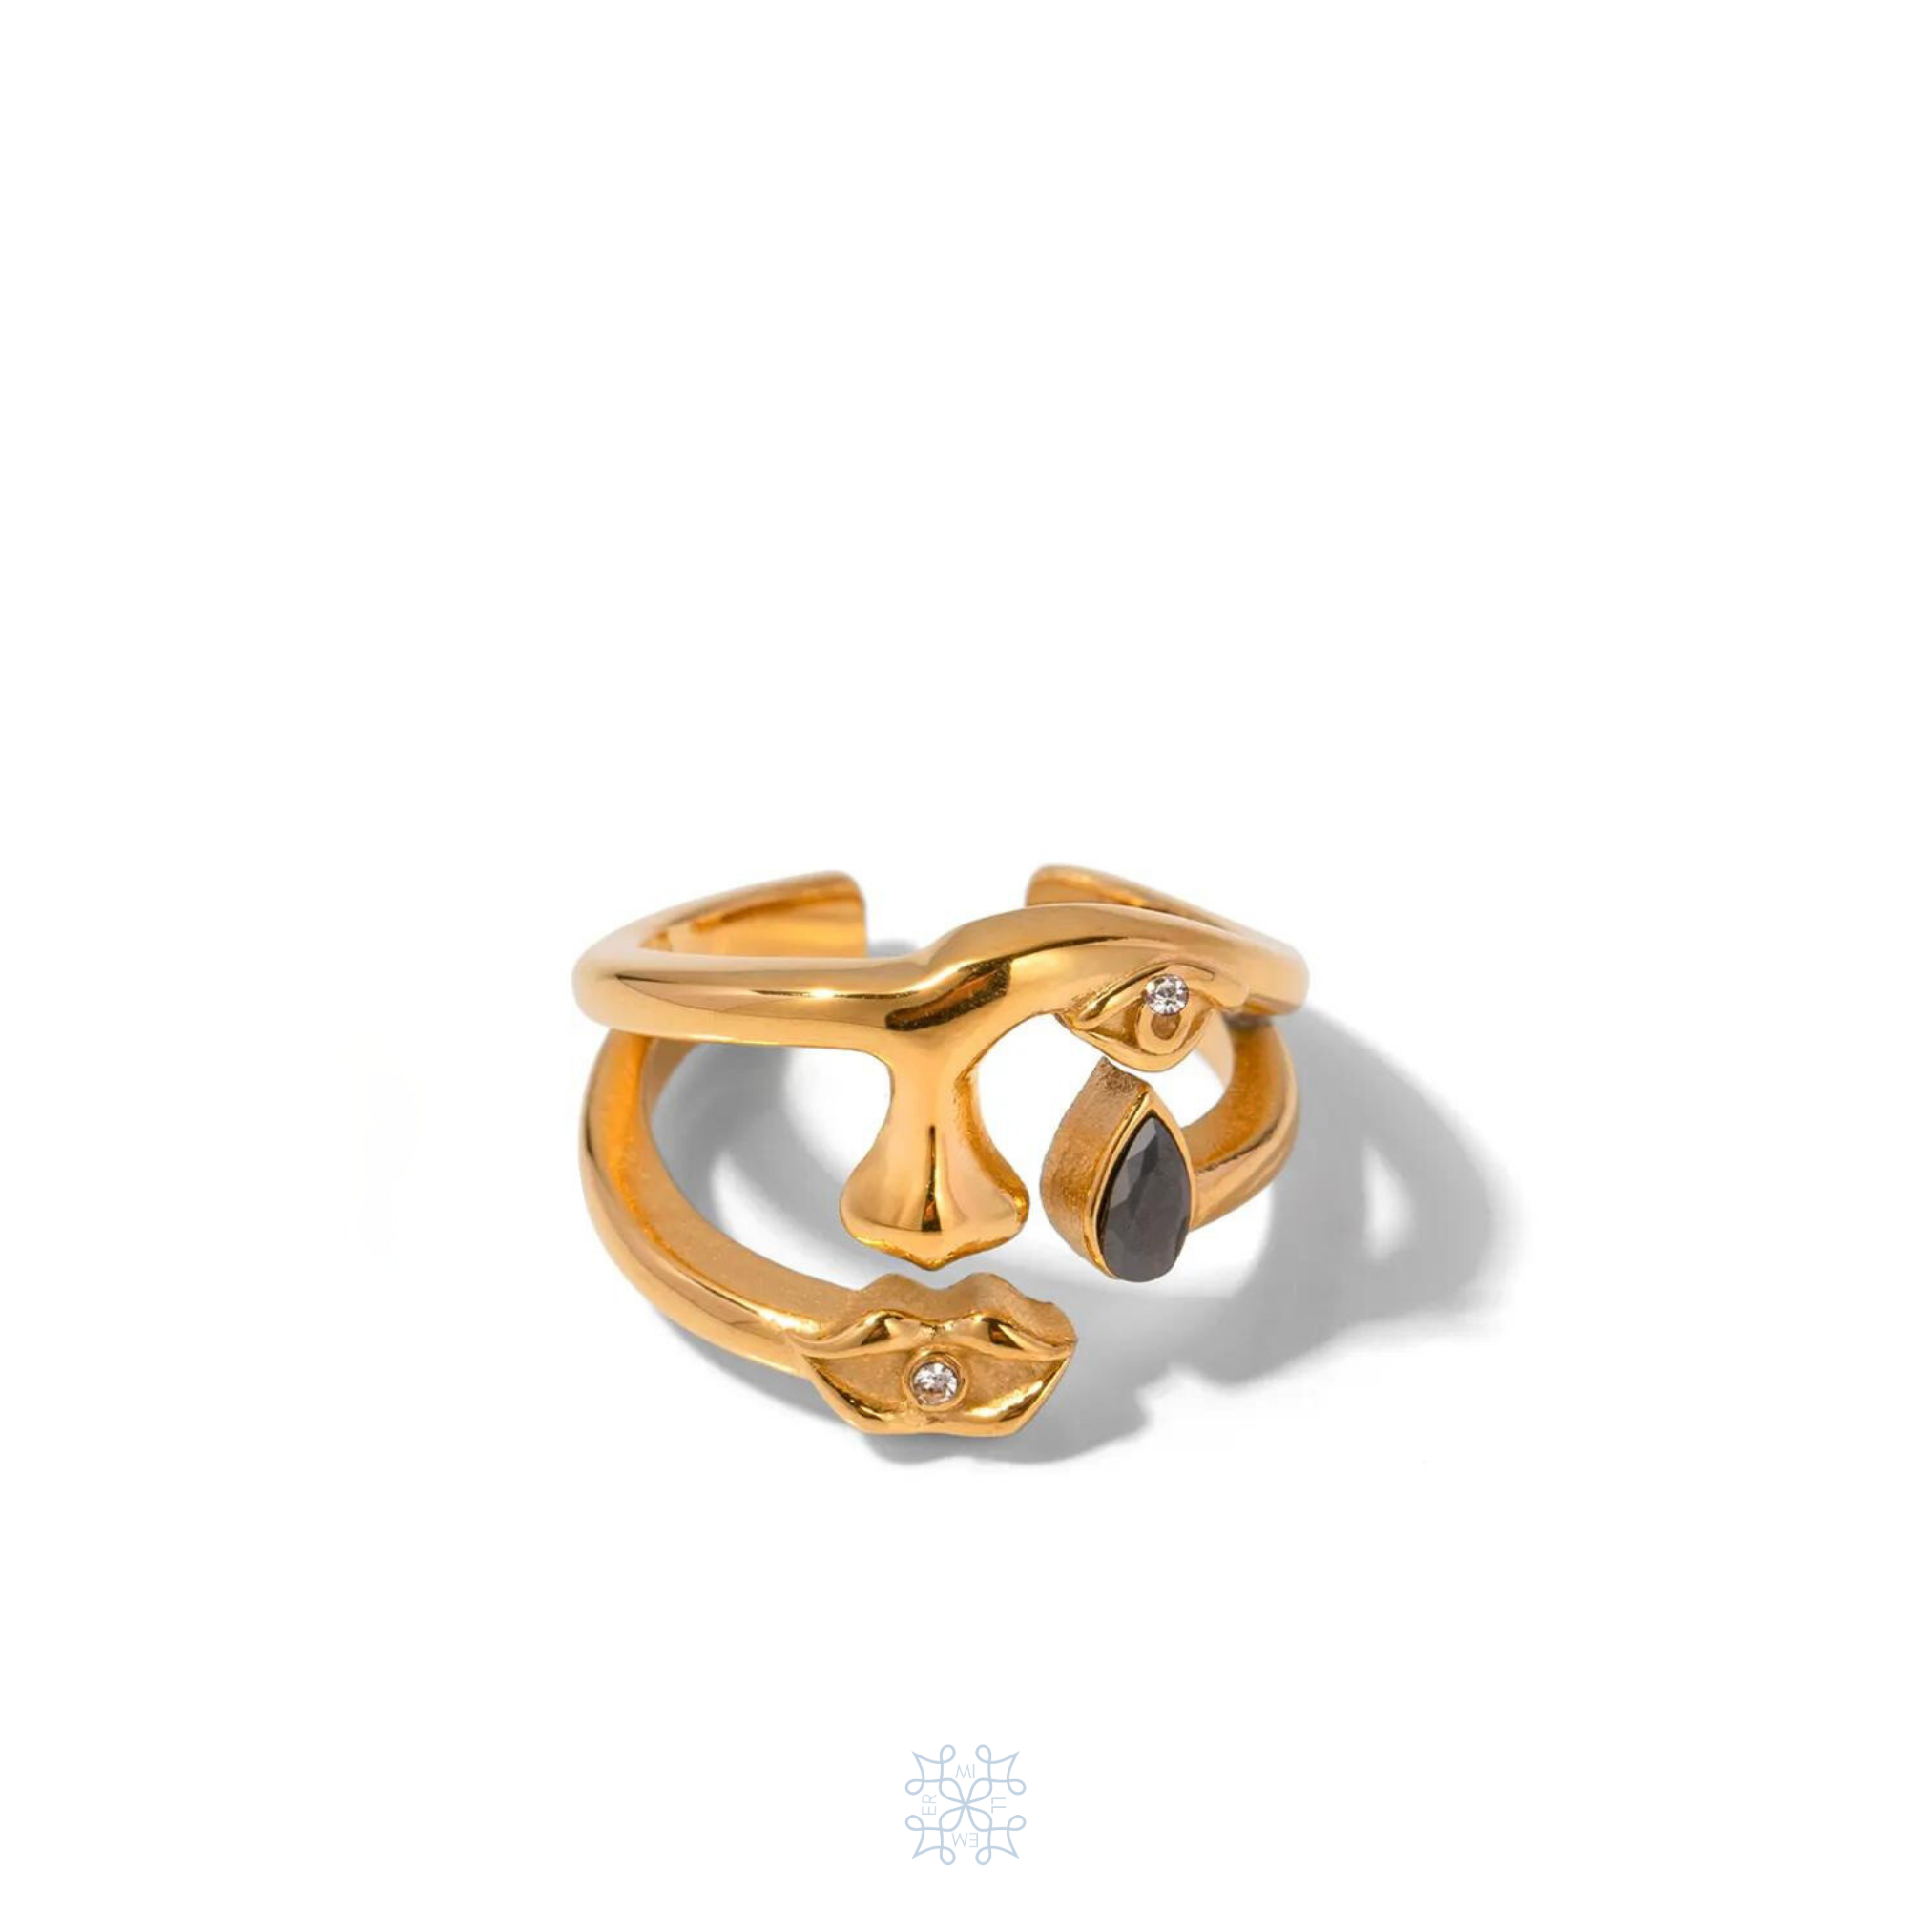 Her face gold zircon ring. Surreal gold ring with the shape of a face , eyes, noes, lips and a teardrop with a black zircon attached on the drop. In the lip and eye it has a small white zircon